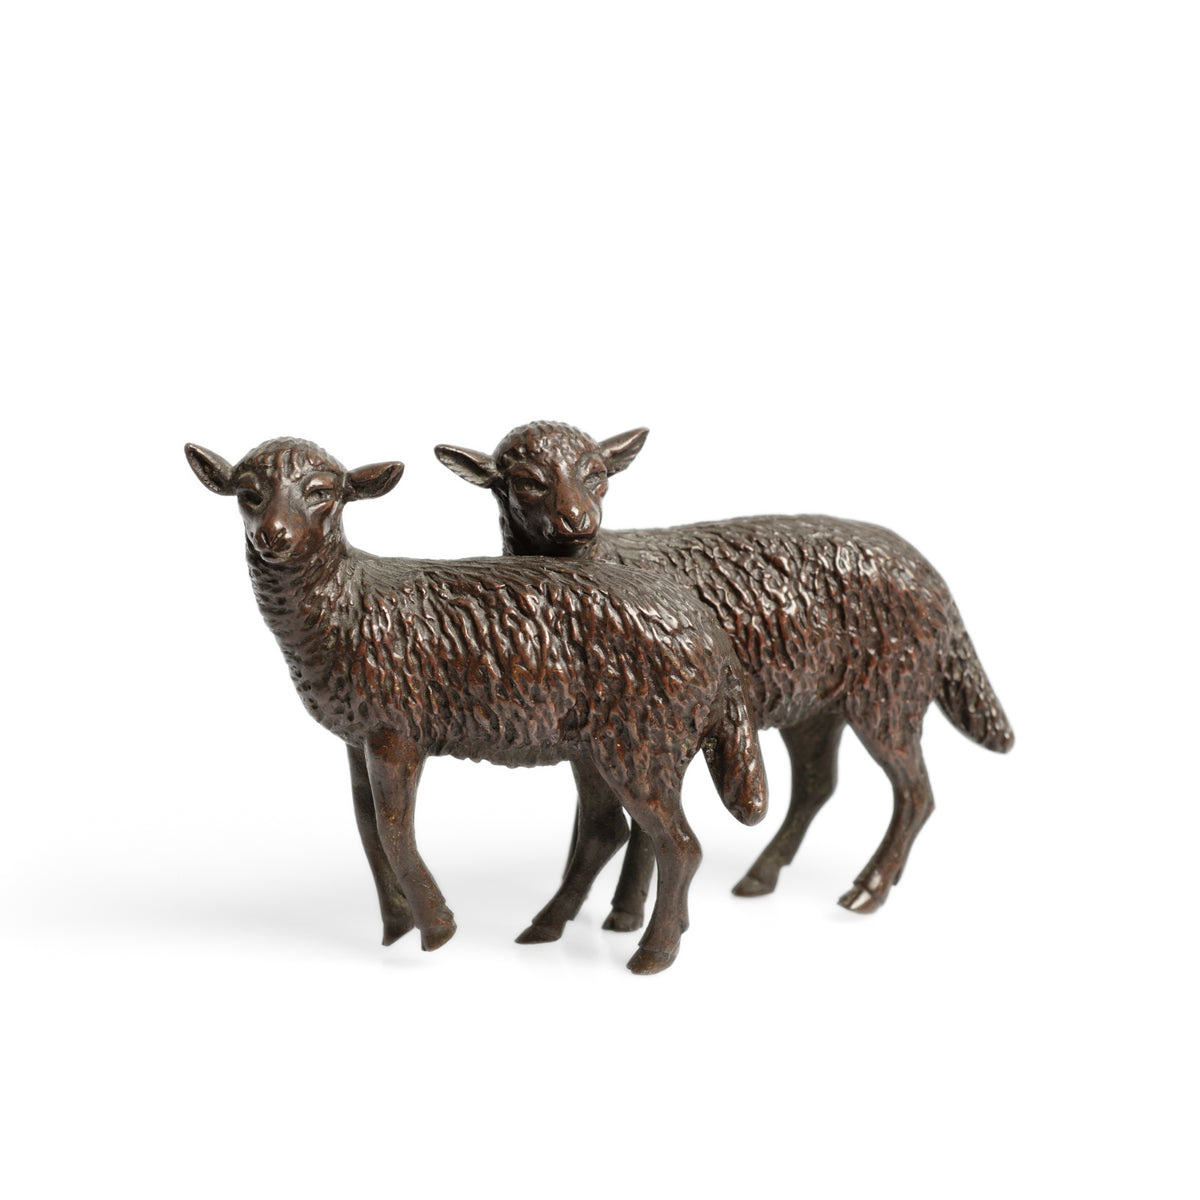 Antique Miniature Bronze Figure of Two Lambs Standing - Brown Patination (Code 2784)